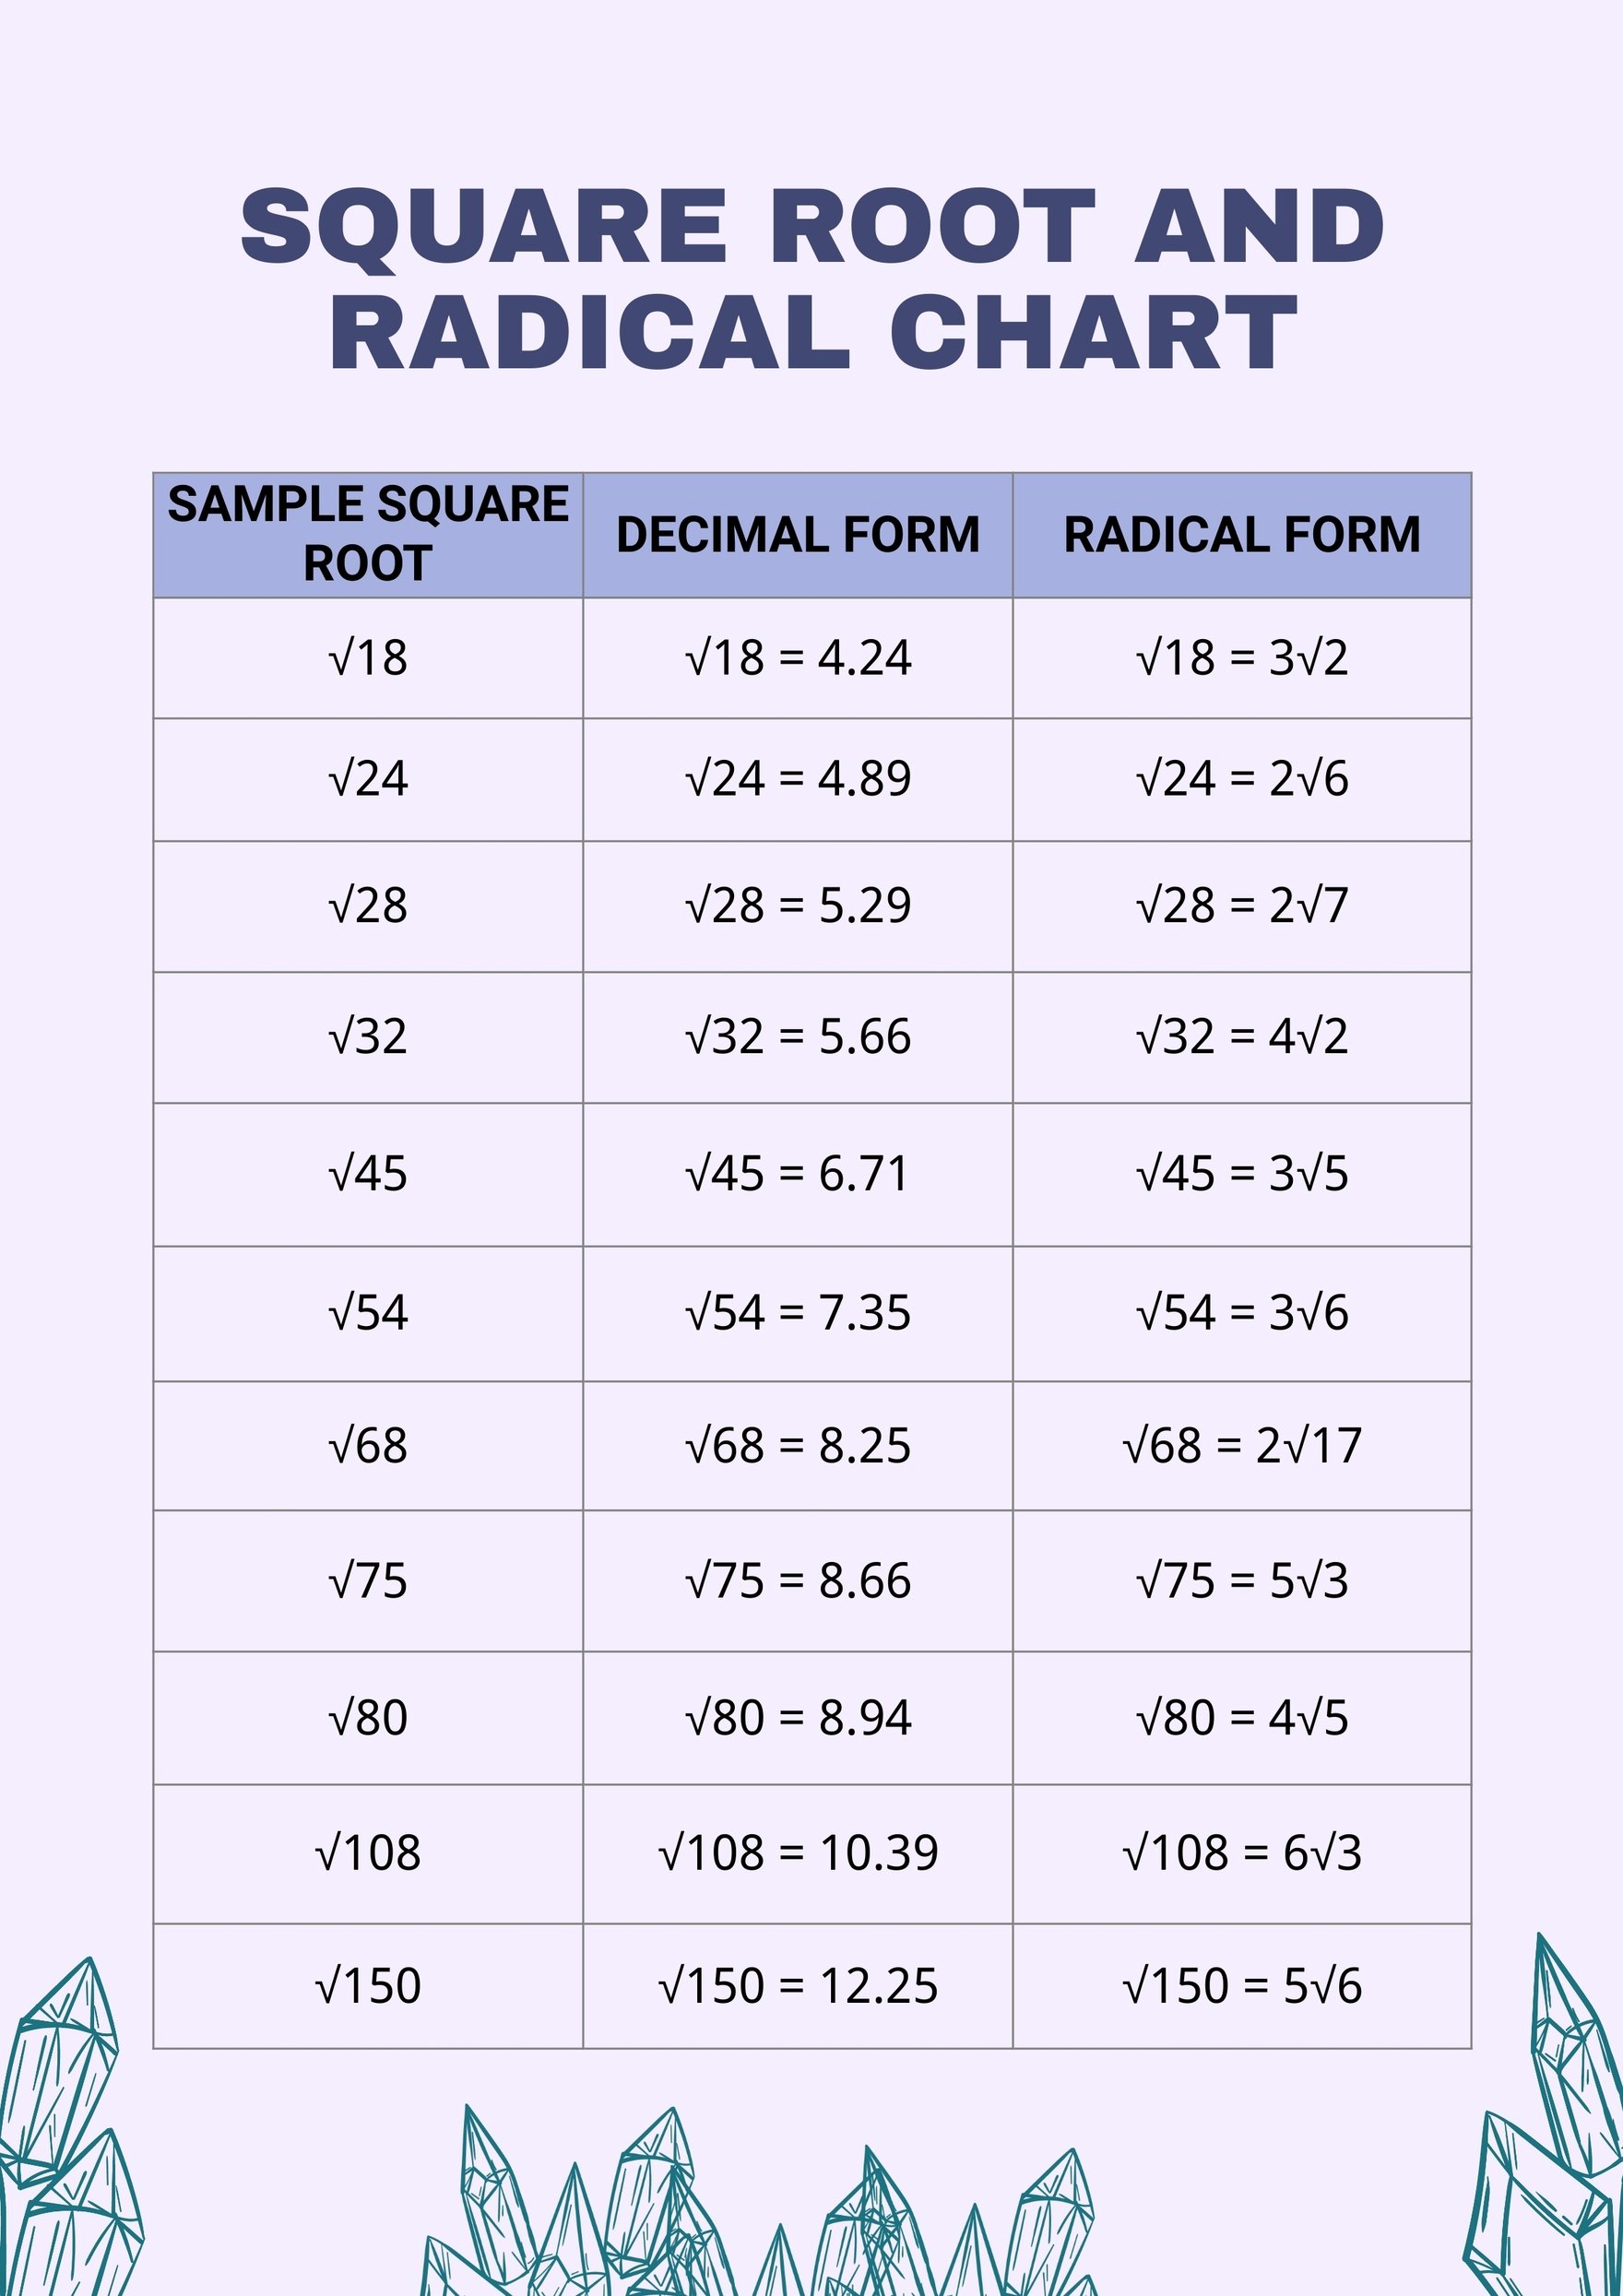 Free Square Root And Radical Chart Download In PDF Illustrator 